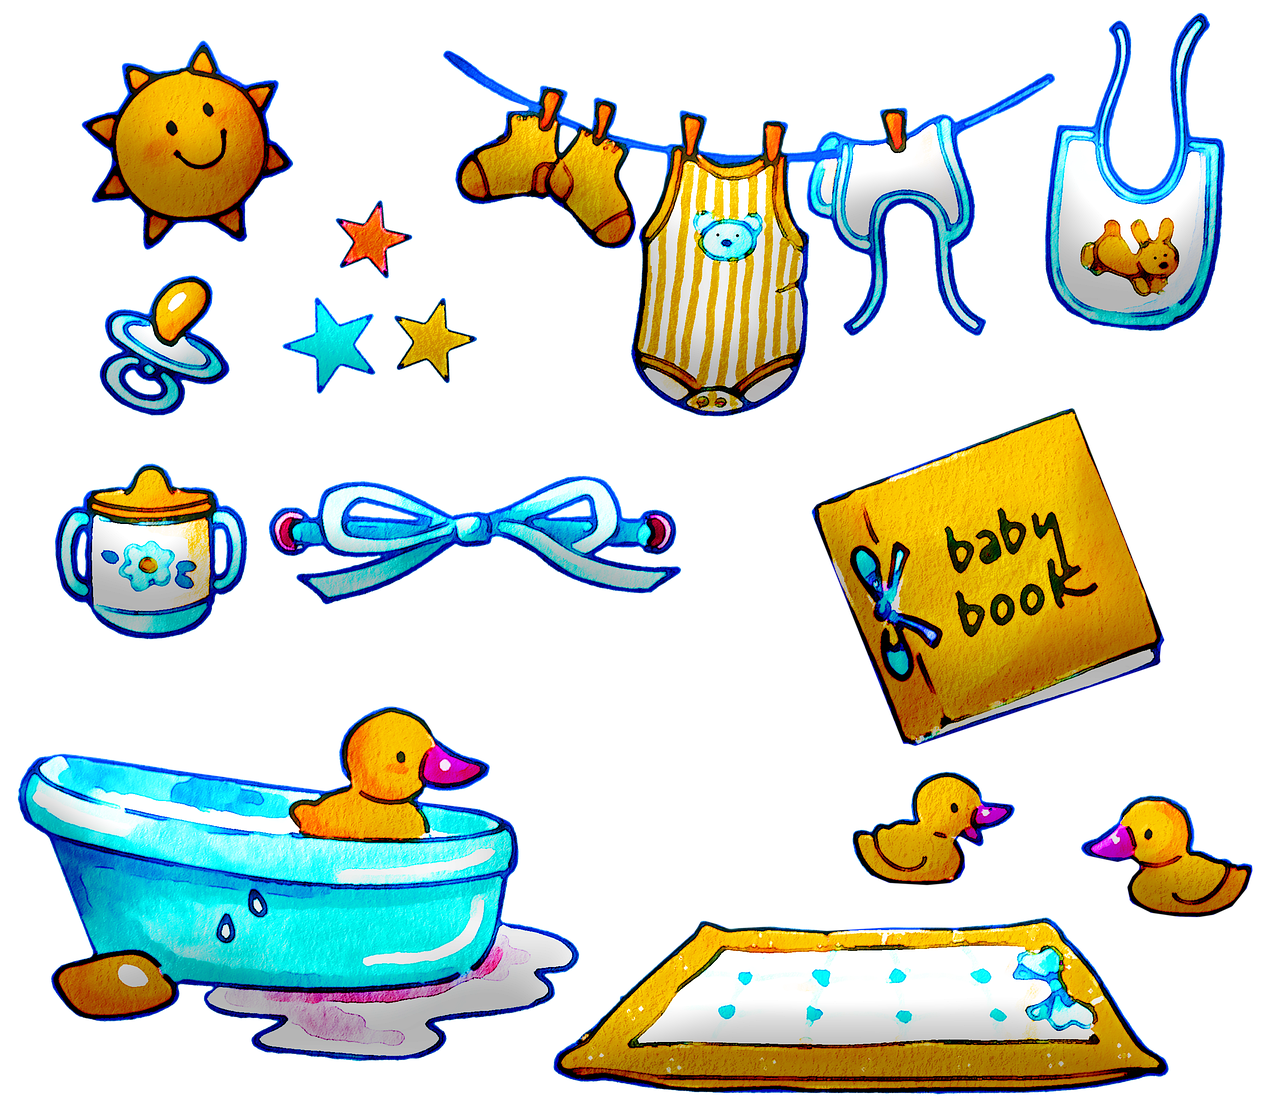 a collection of baby items on a black background, a digital rendering, tumblr, process art, rubber duck, けもの, fully decorated, glowing blue interior components